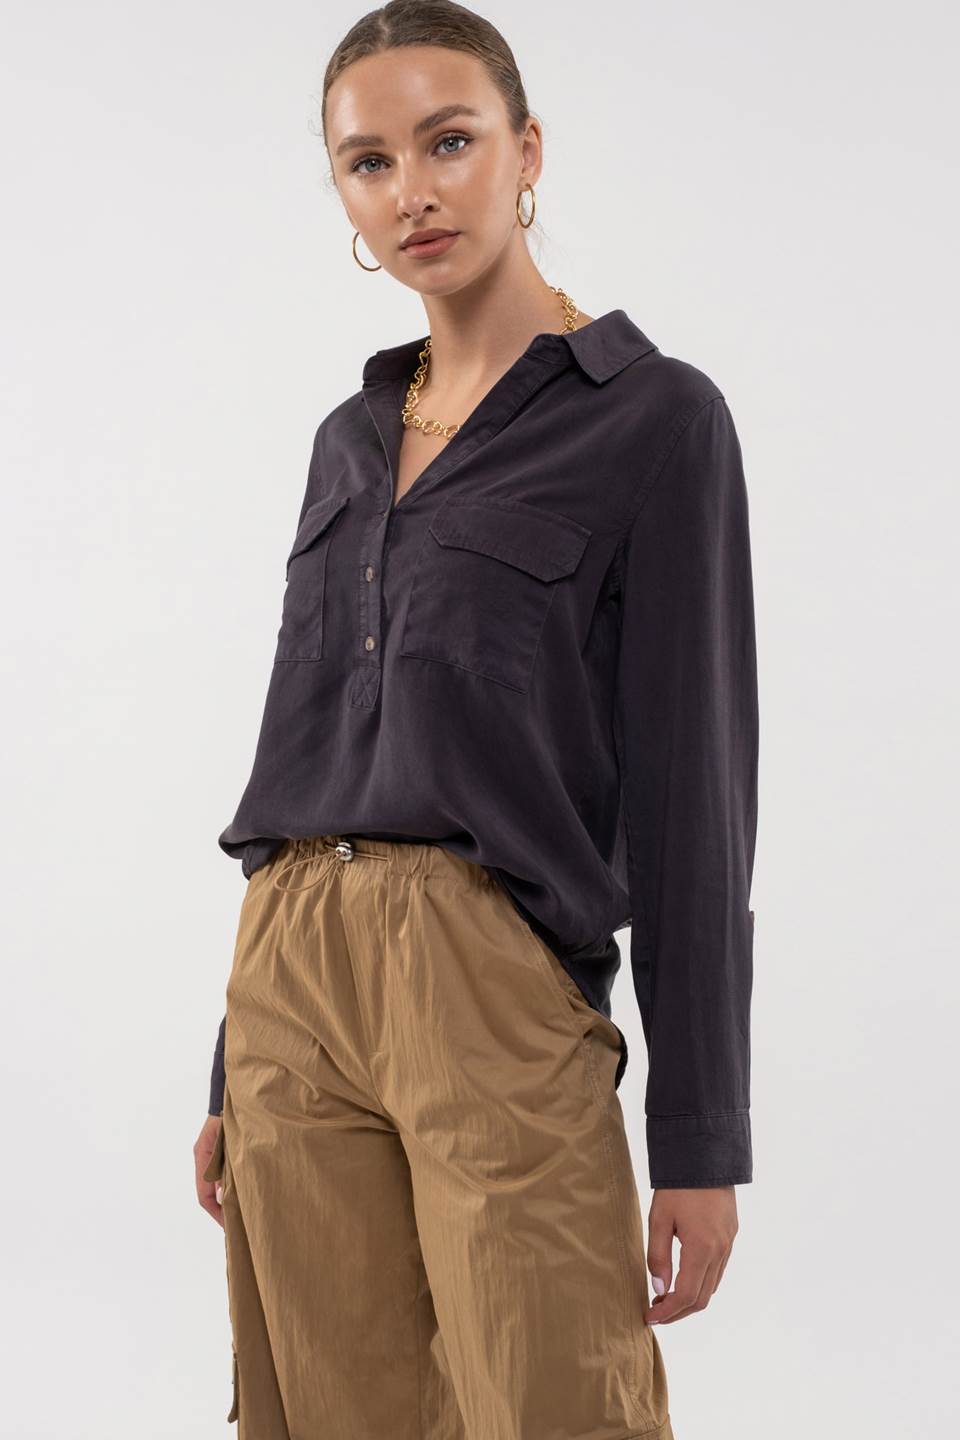 HALF BUTTON UP COLLARED WOVEN TOP